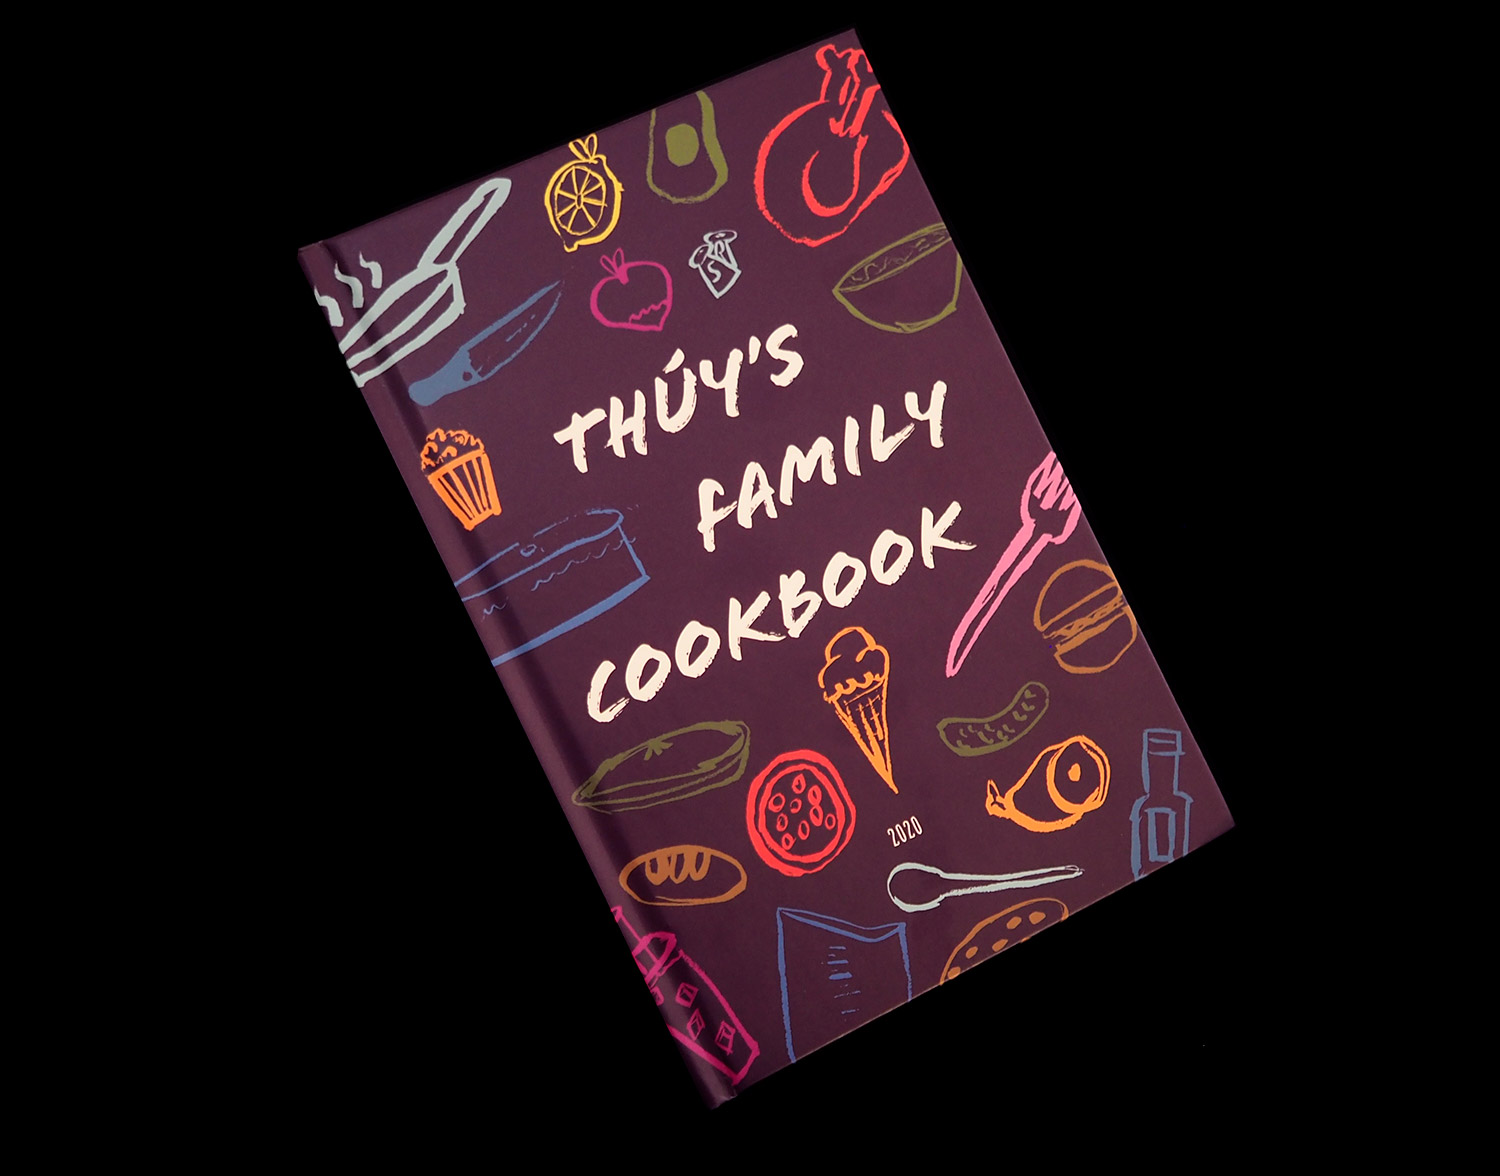 Printed Copy of “Thúy’s Family Cookbook 2020”